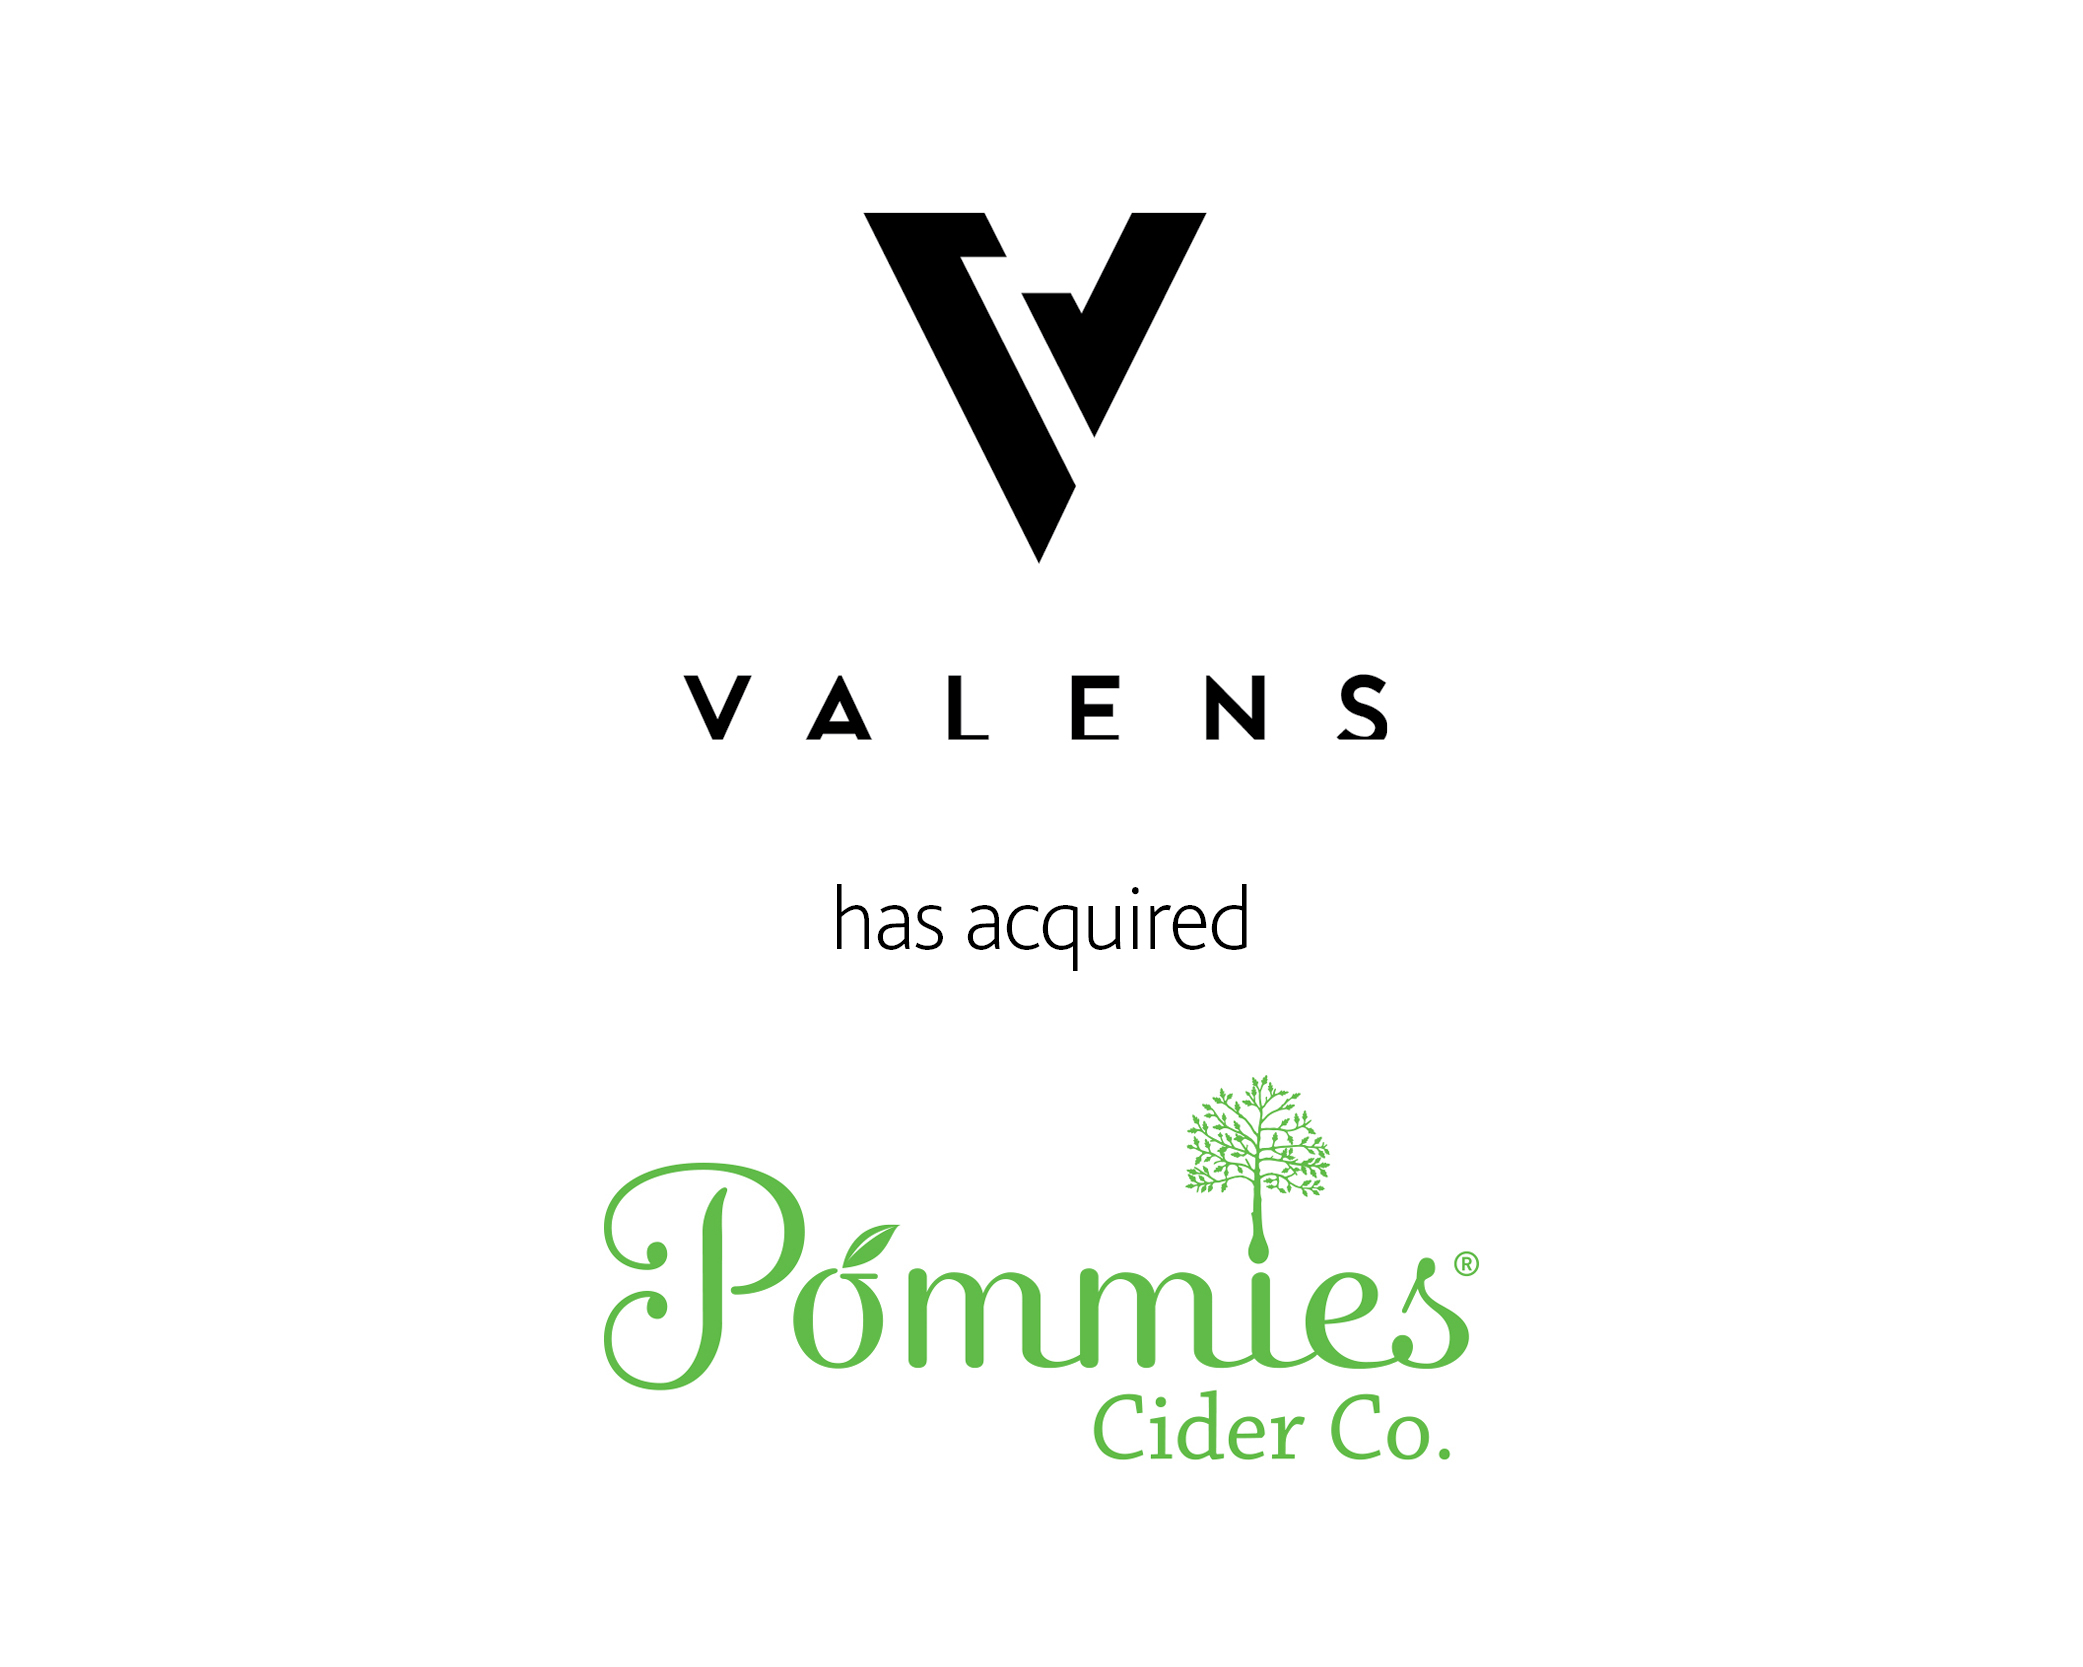 Valens has acquired Pommies Cider Co.